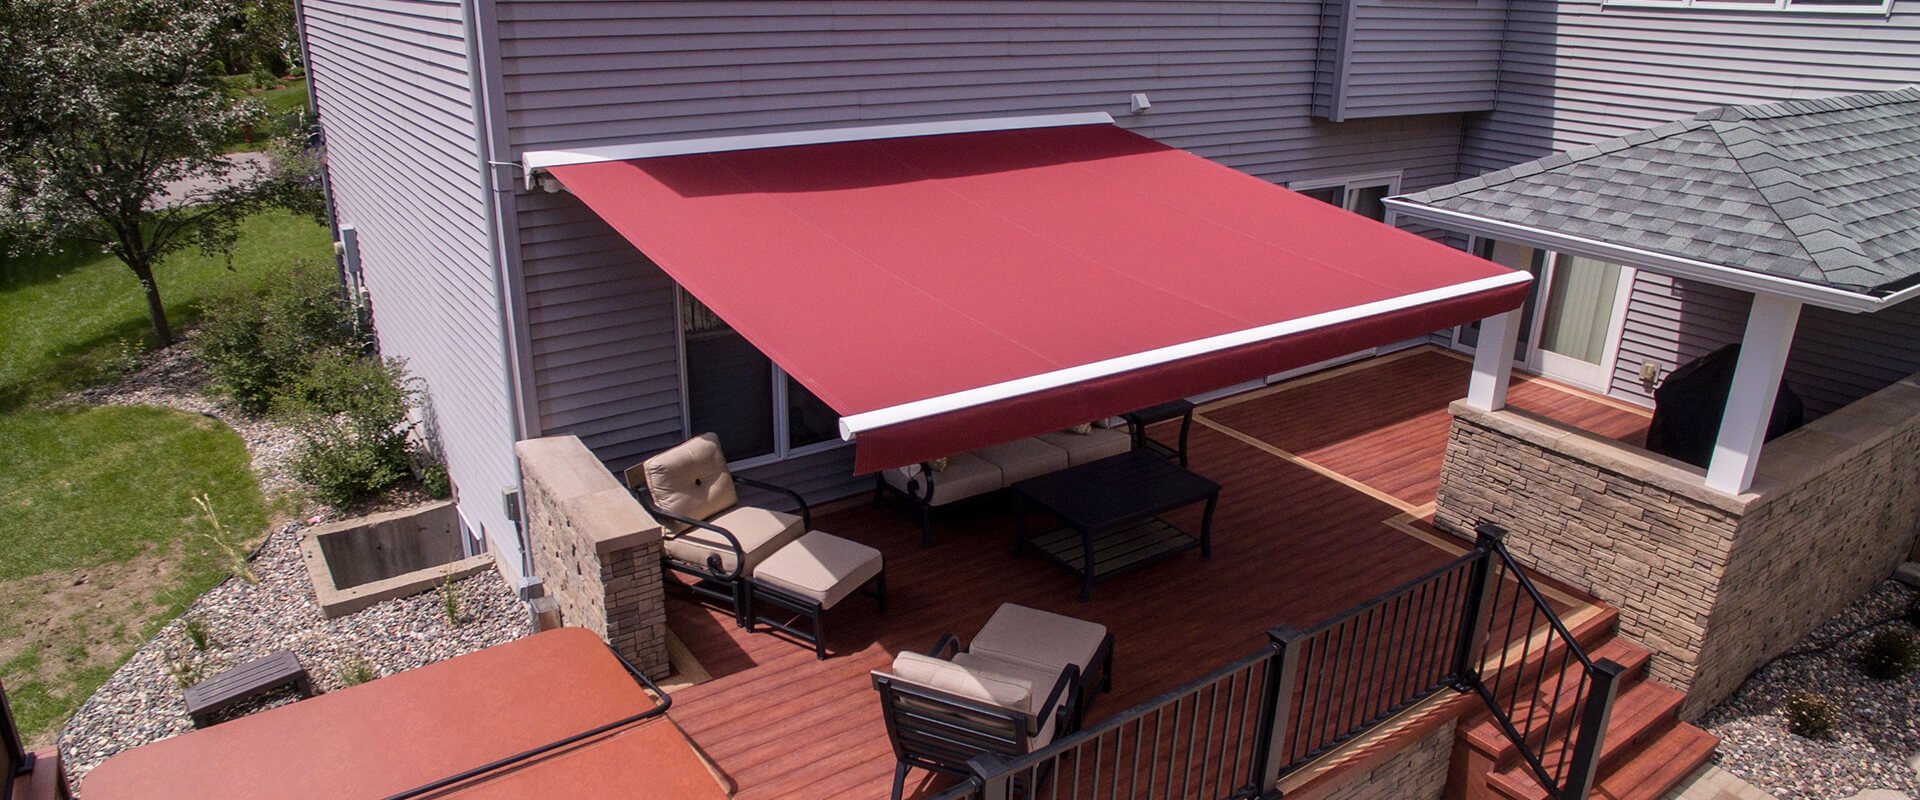 How to Pick The Right Awning Fabric